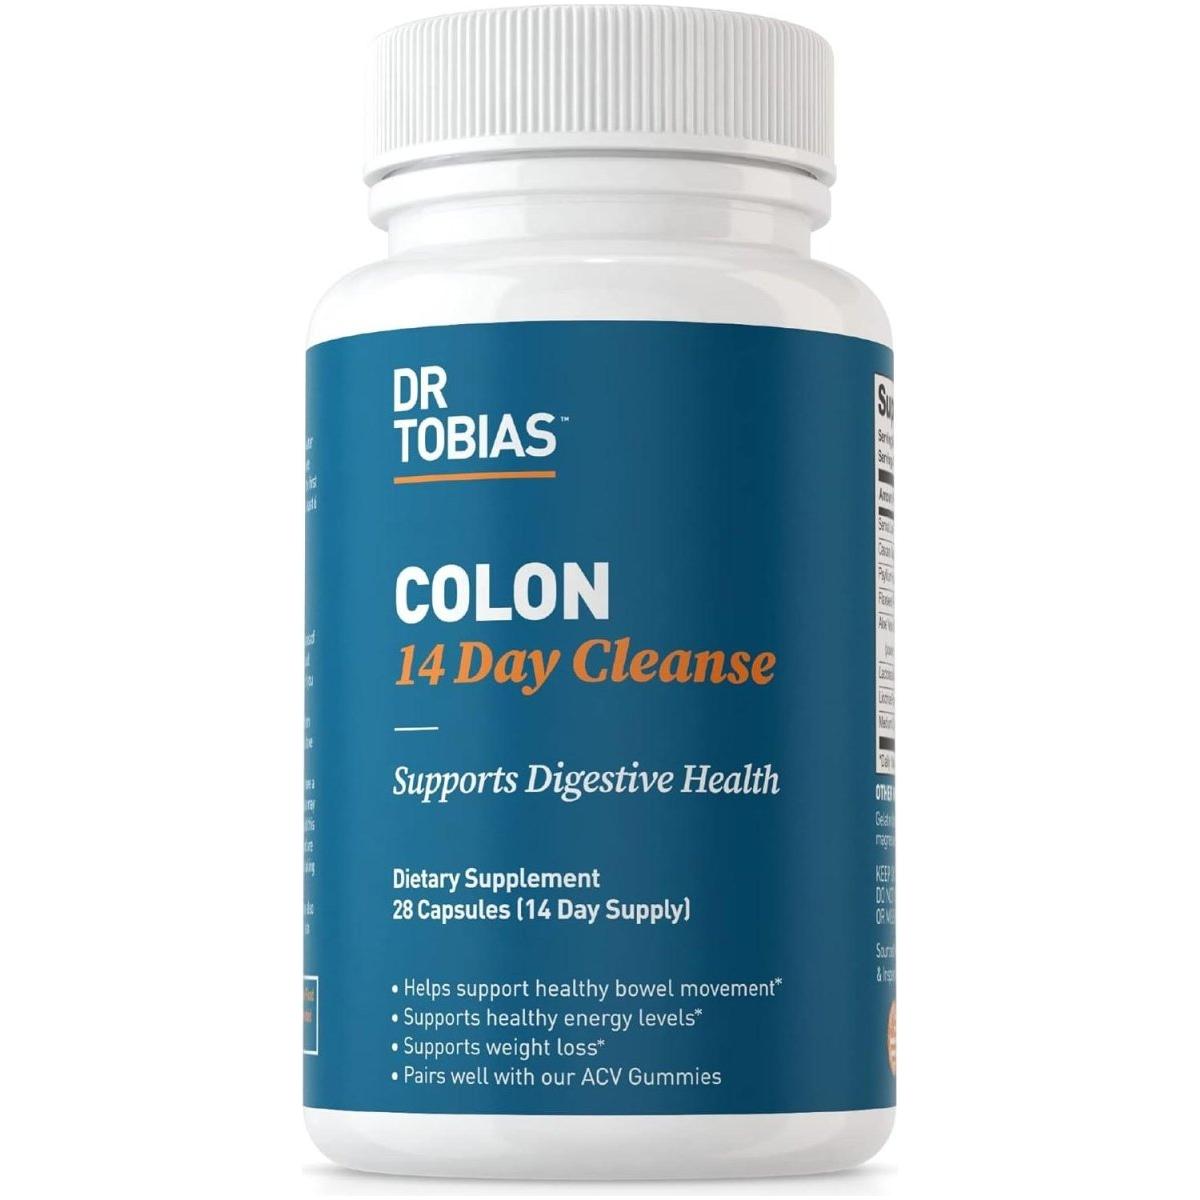 Dr. Tobias Colon 14 Day Cleanse 28 Capsules 1 - 2 Daily - Glam Global UK